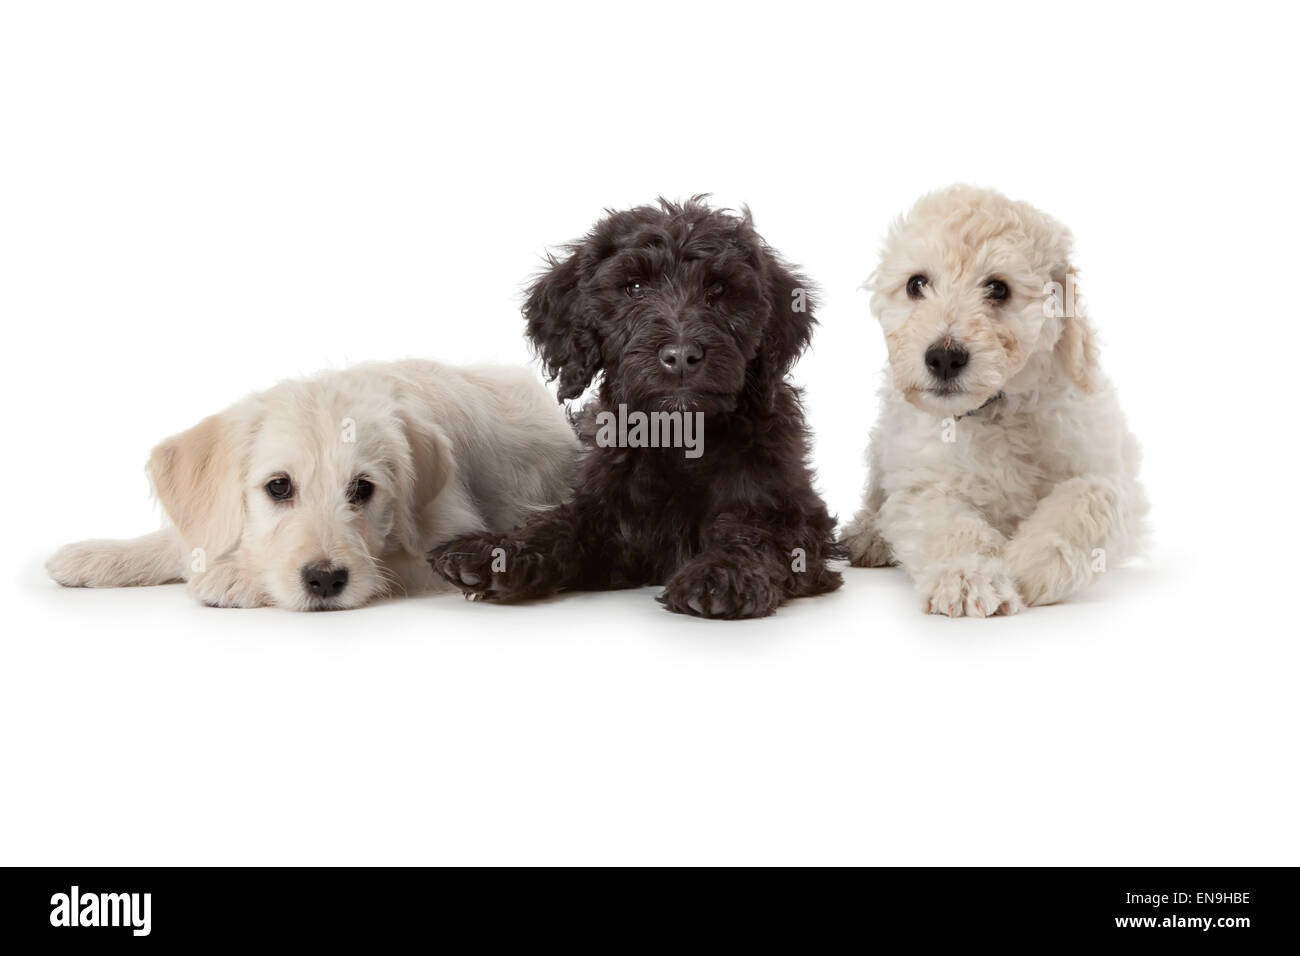 Two white and one black puppy on white background Stock Photo